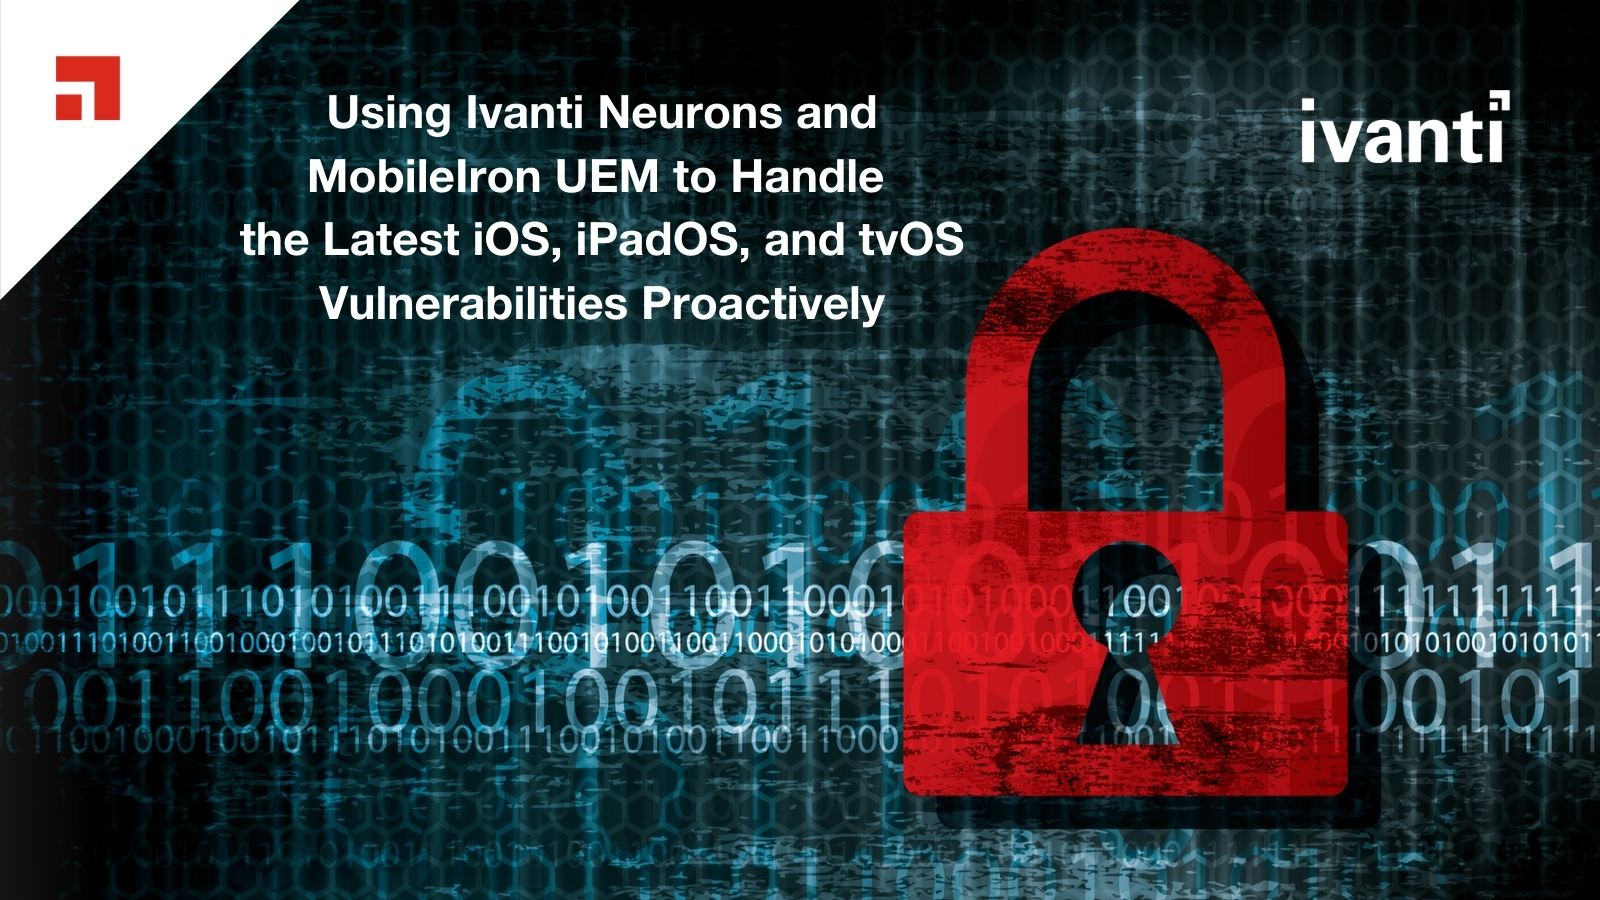 Using Ivanti Neurons and Mobilelron UEM to Handle the Latest iOS, iPadOS, and tvOS Vulnerabilities Proactively 